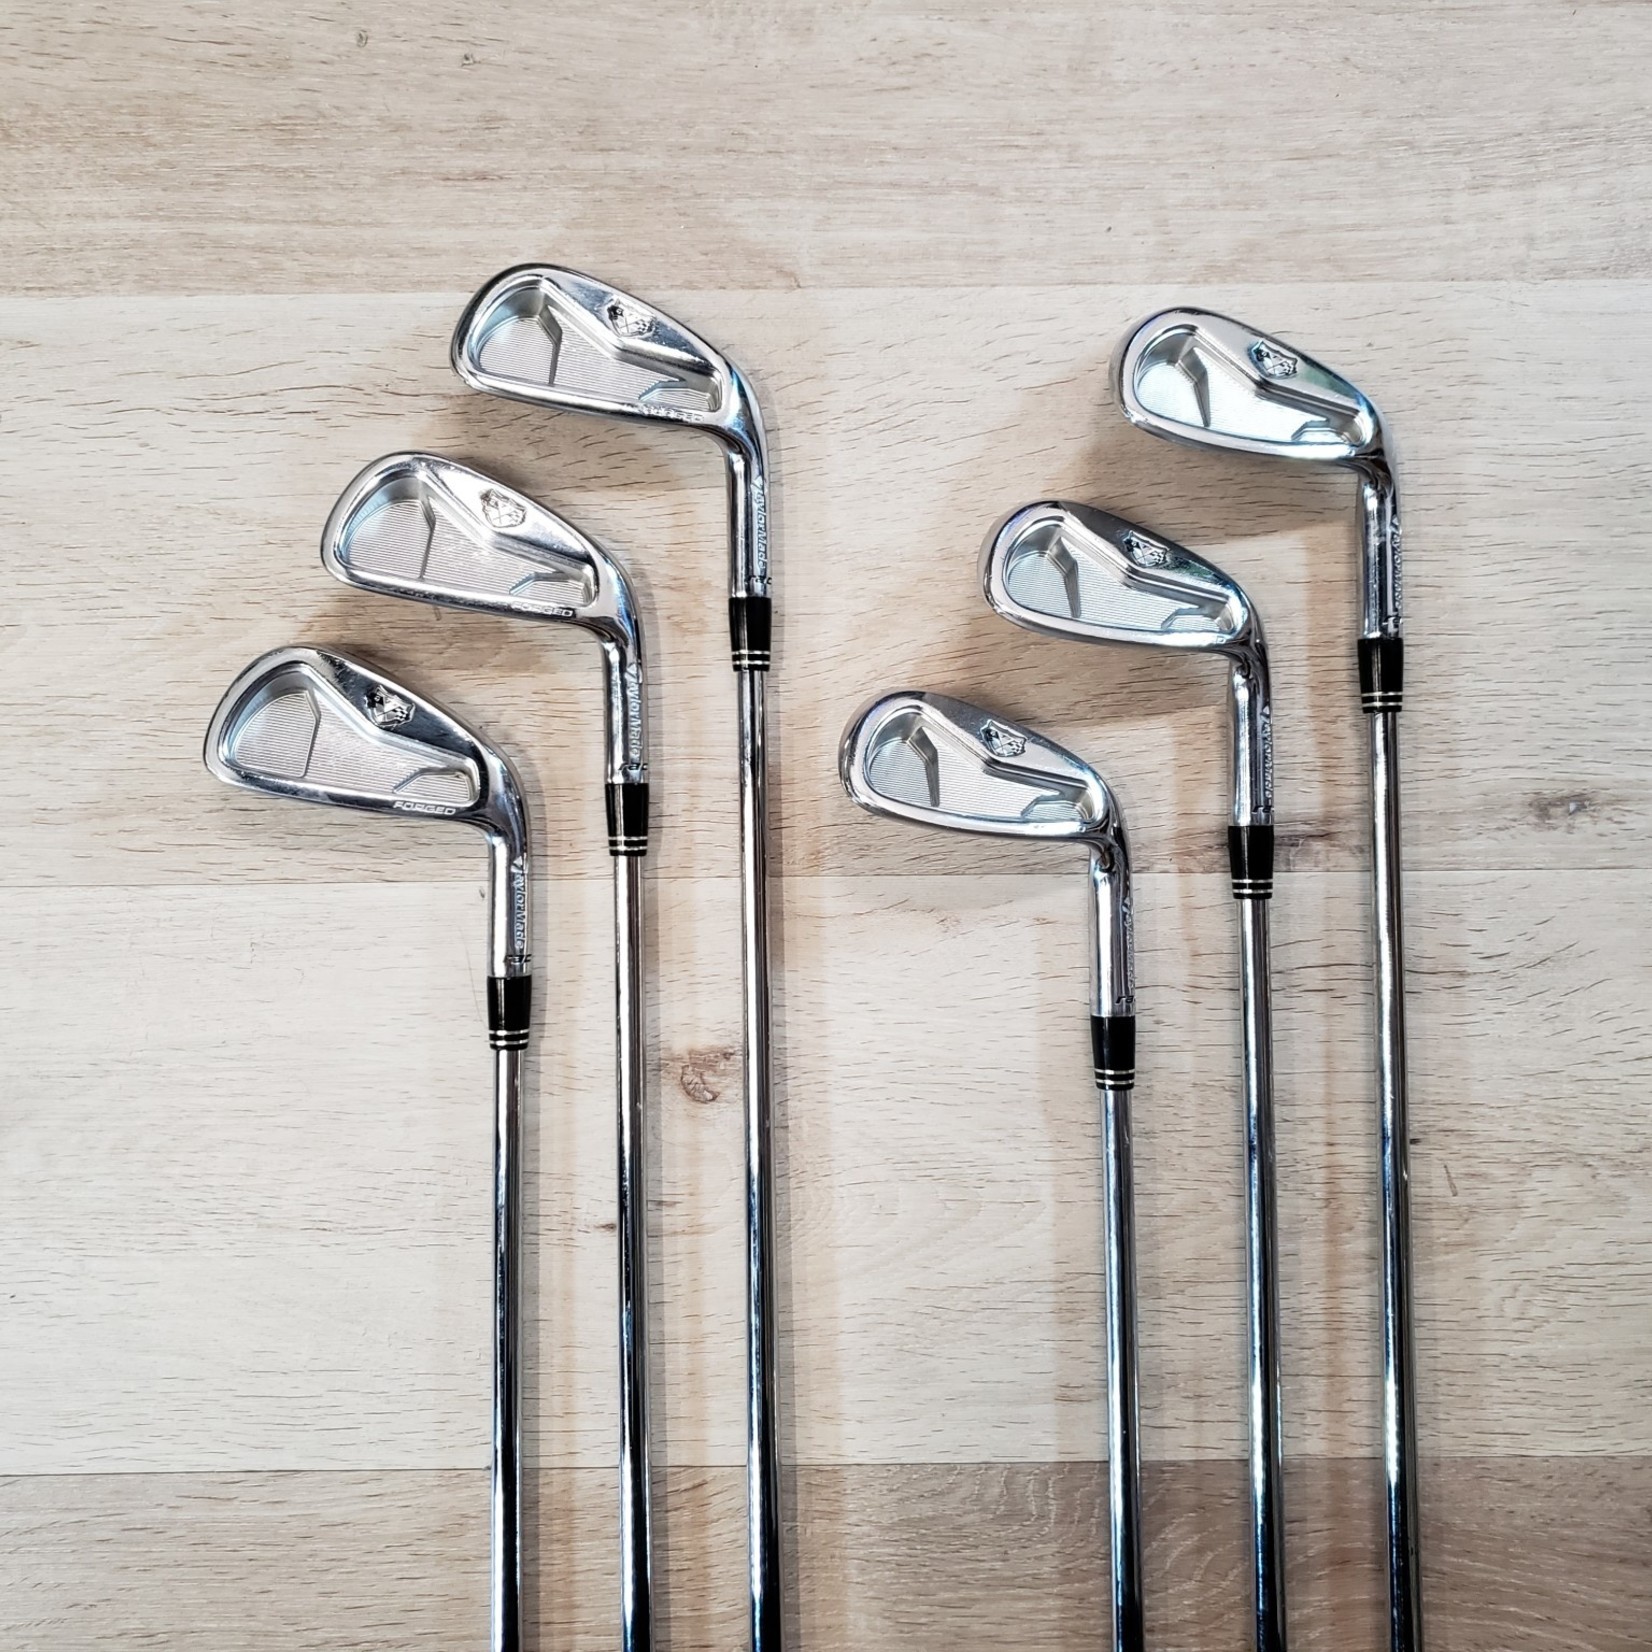 TaylorMade (Demo) Taylormade Rac TP Forged Iron Set 5-PW Rifle Flighted 5.0 Regular (RH)